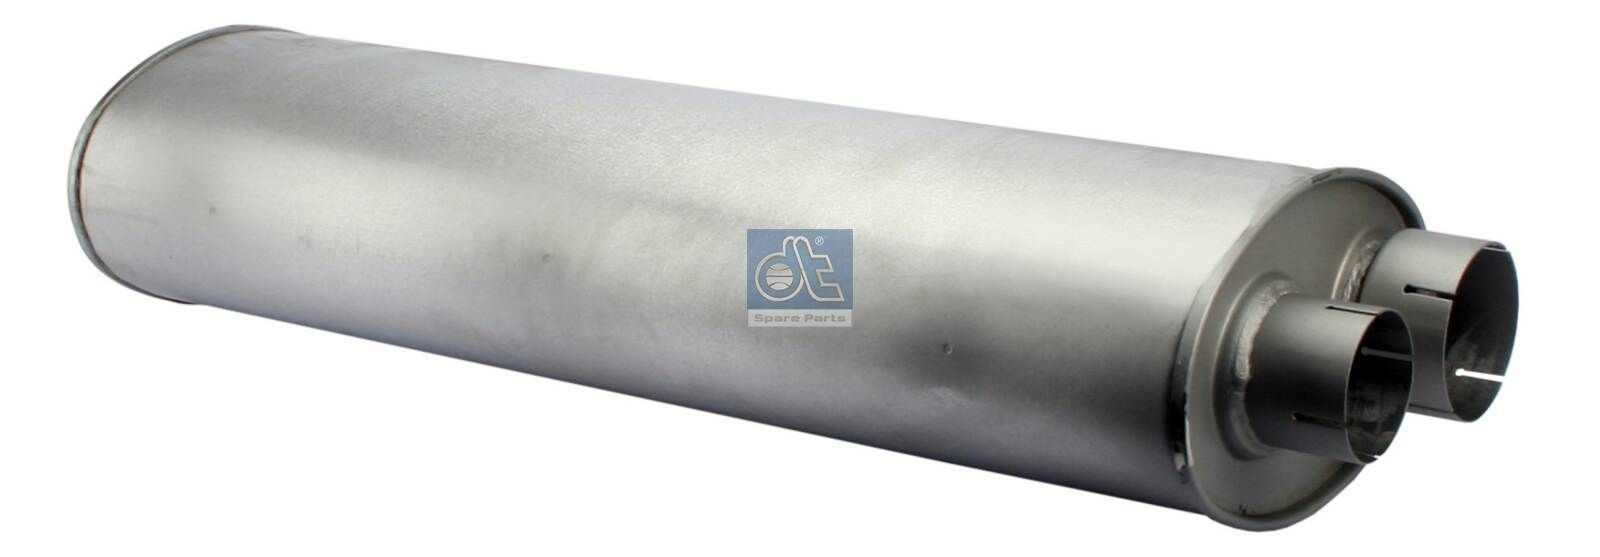 DT Spare Parts 3.25016 Middle- / End Silencer 81 15101 0296